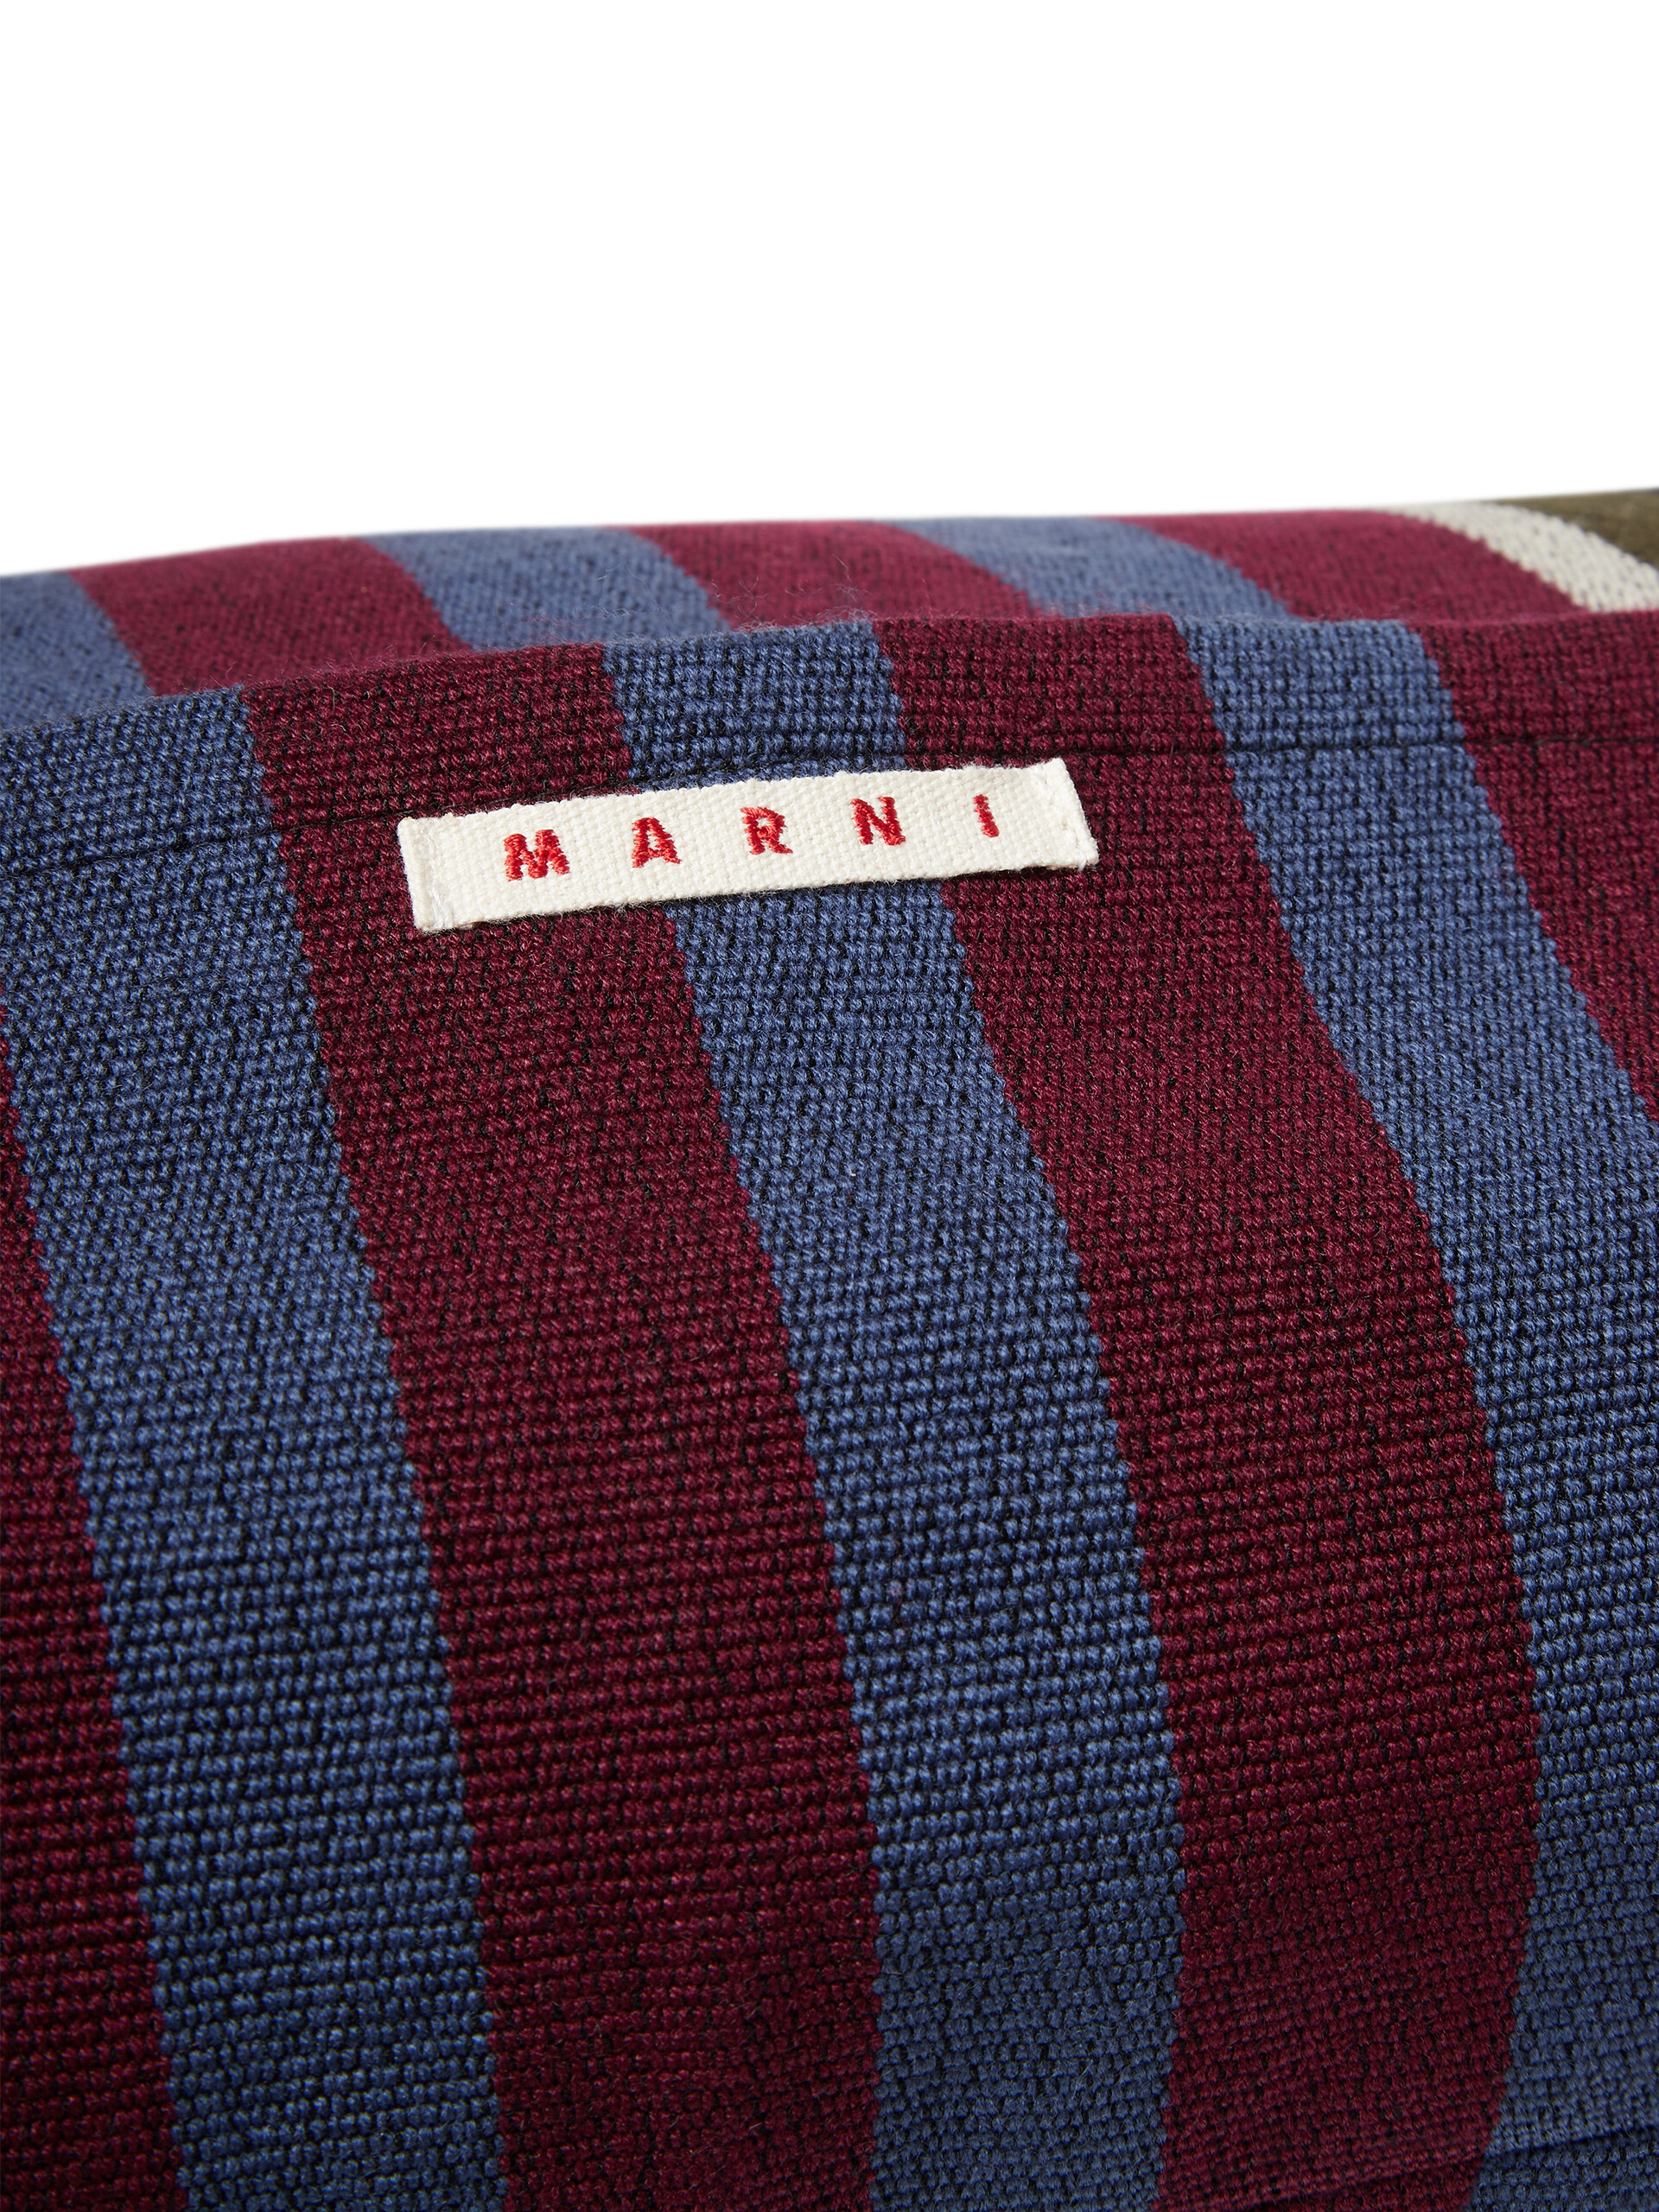 MARNI MARKET rectangular pillow cover in polyester with green burgundy and pale blue vertical stripes - Furniture - Image 3